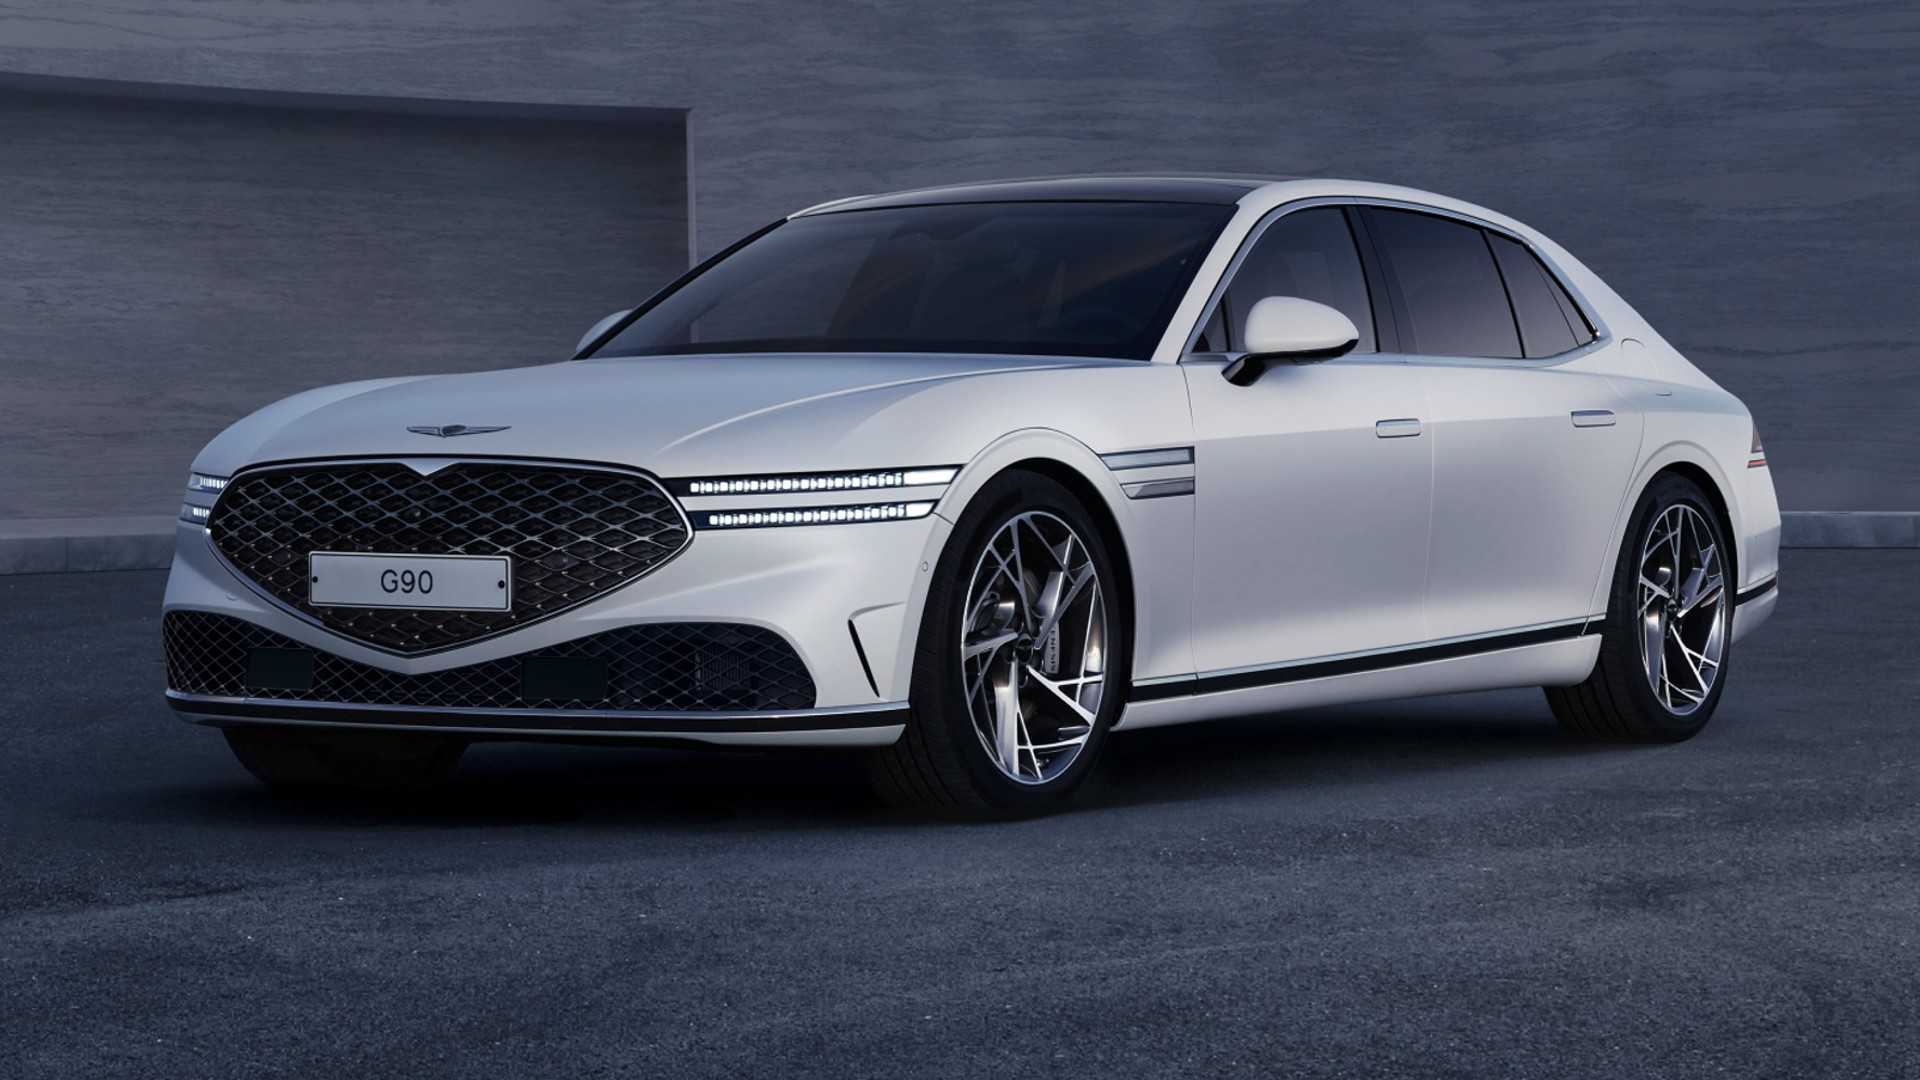 The 2023 Genesis G90 Will Be Available In The US With A 420HP Mild